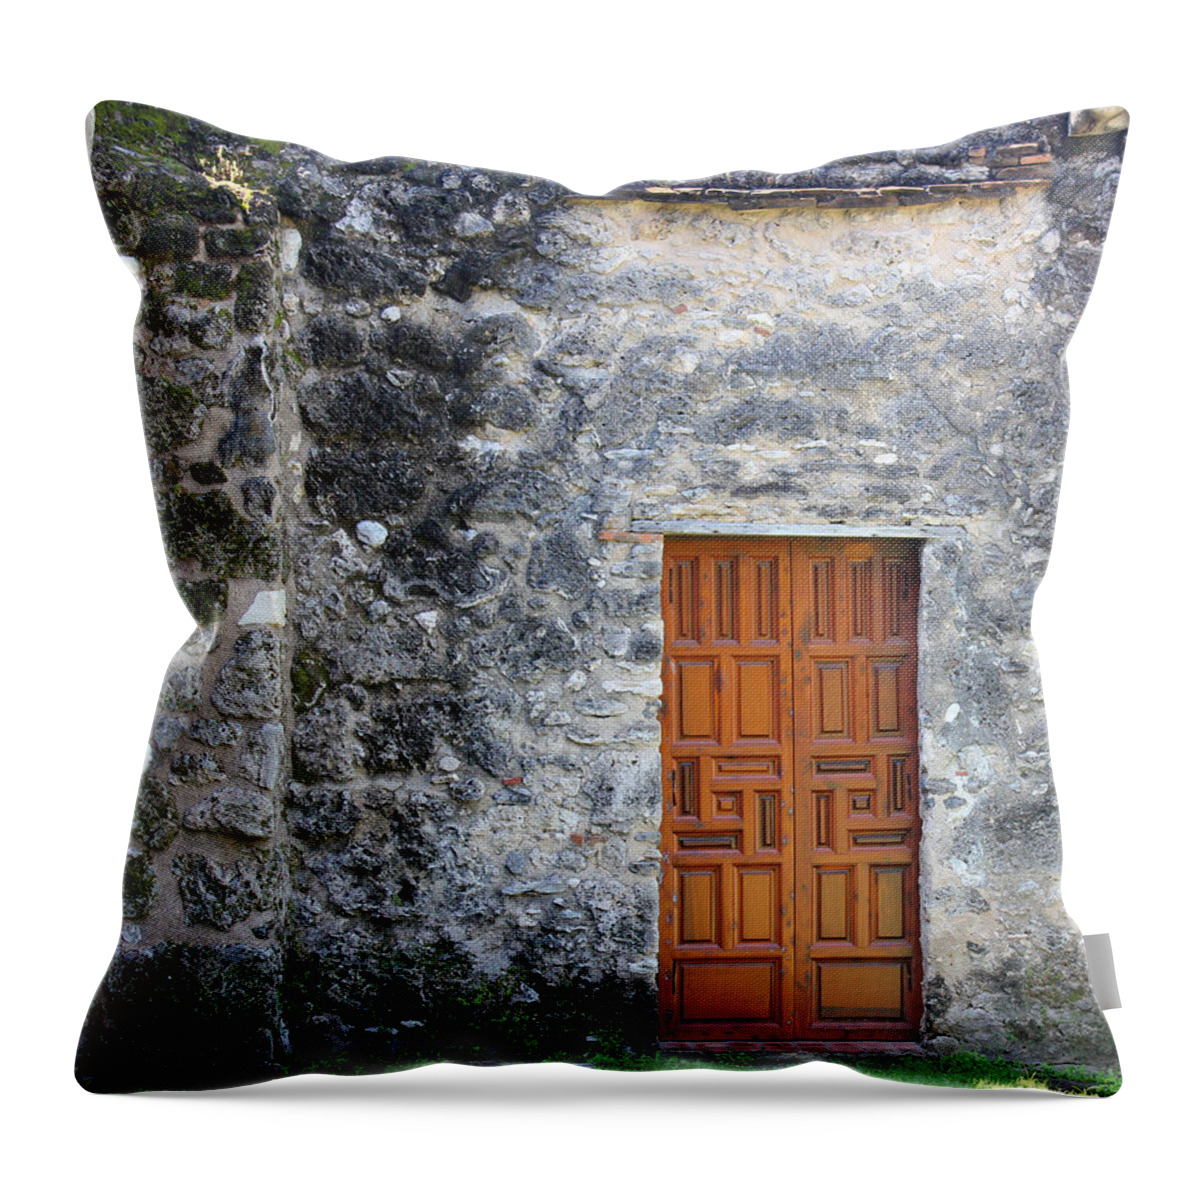 Mission Concepcion Throw Pillow featuring the photograph Mission Concepcion Door by Mary Bedy